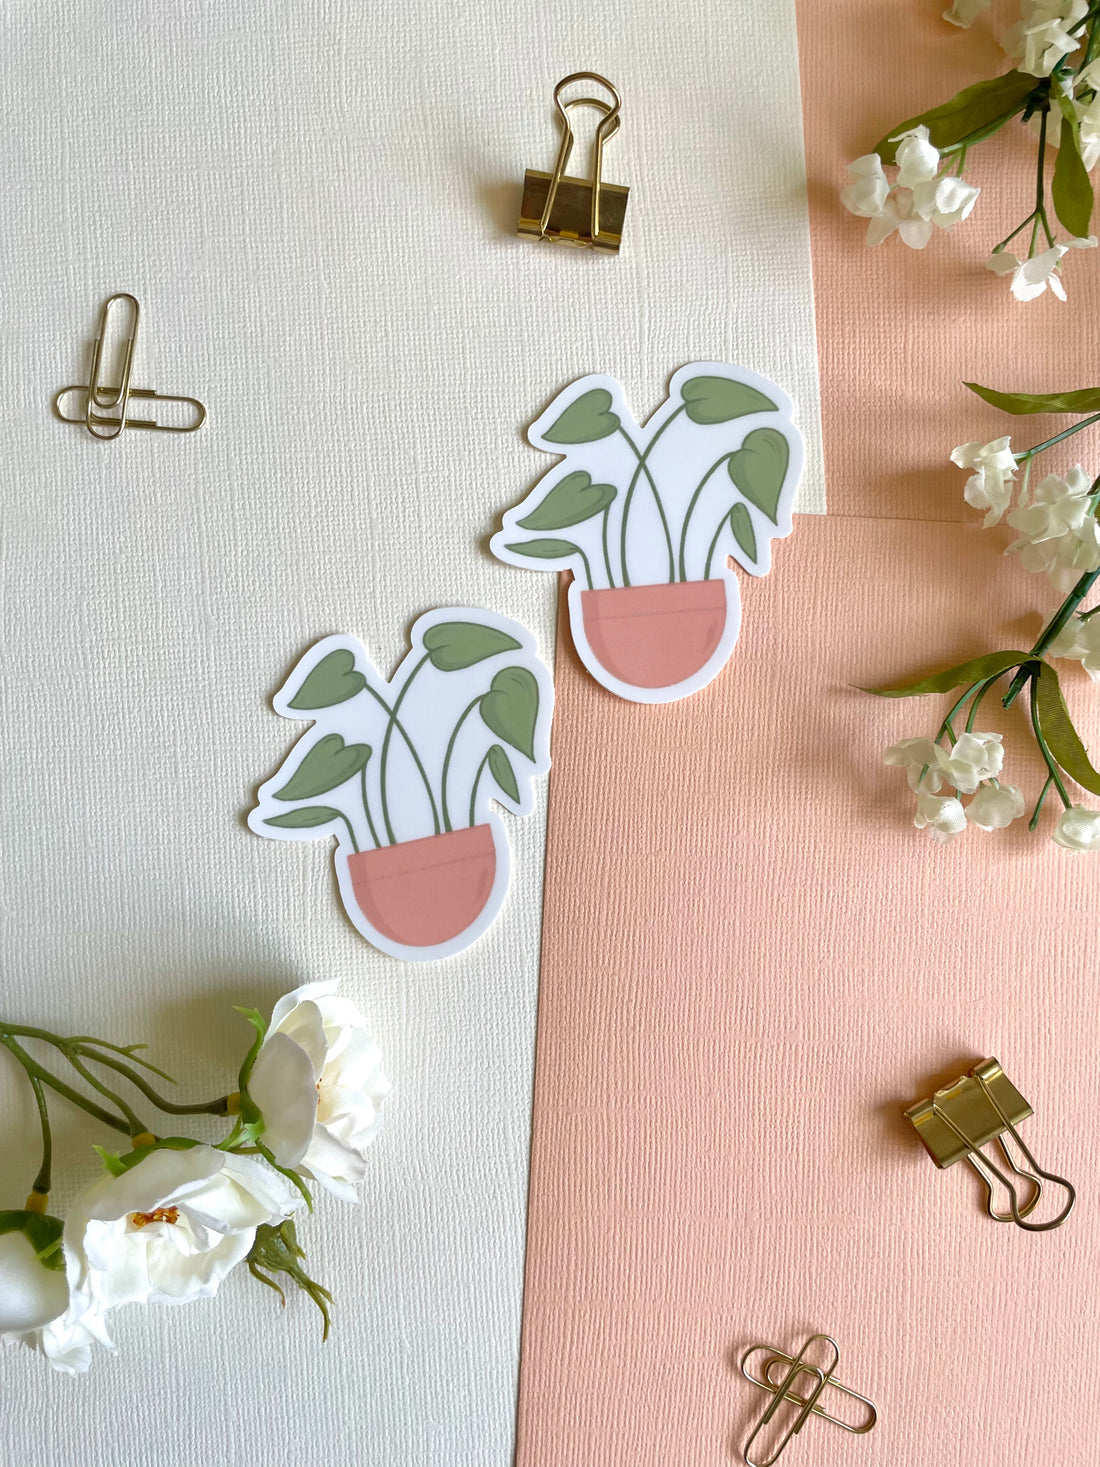 Leafy Potted House Plant Vinyl Sticker